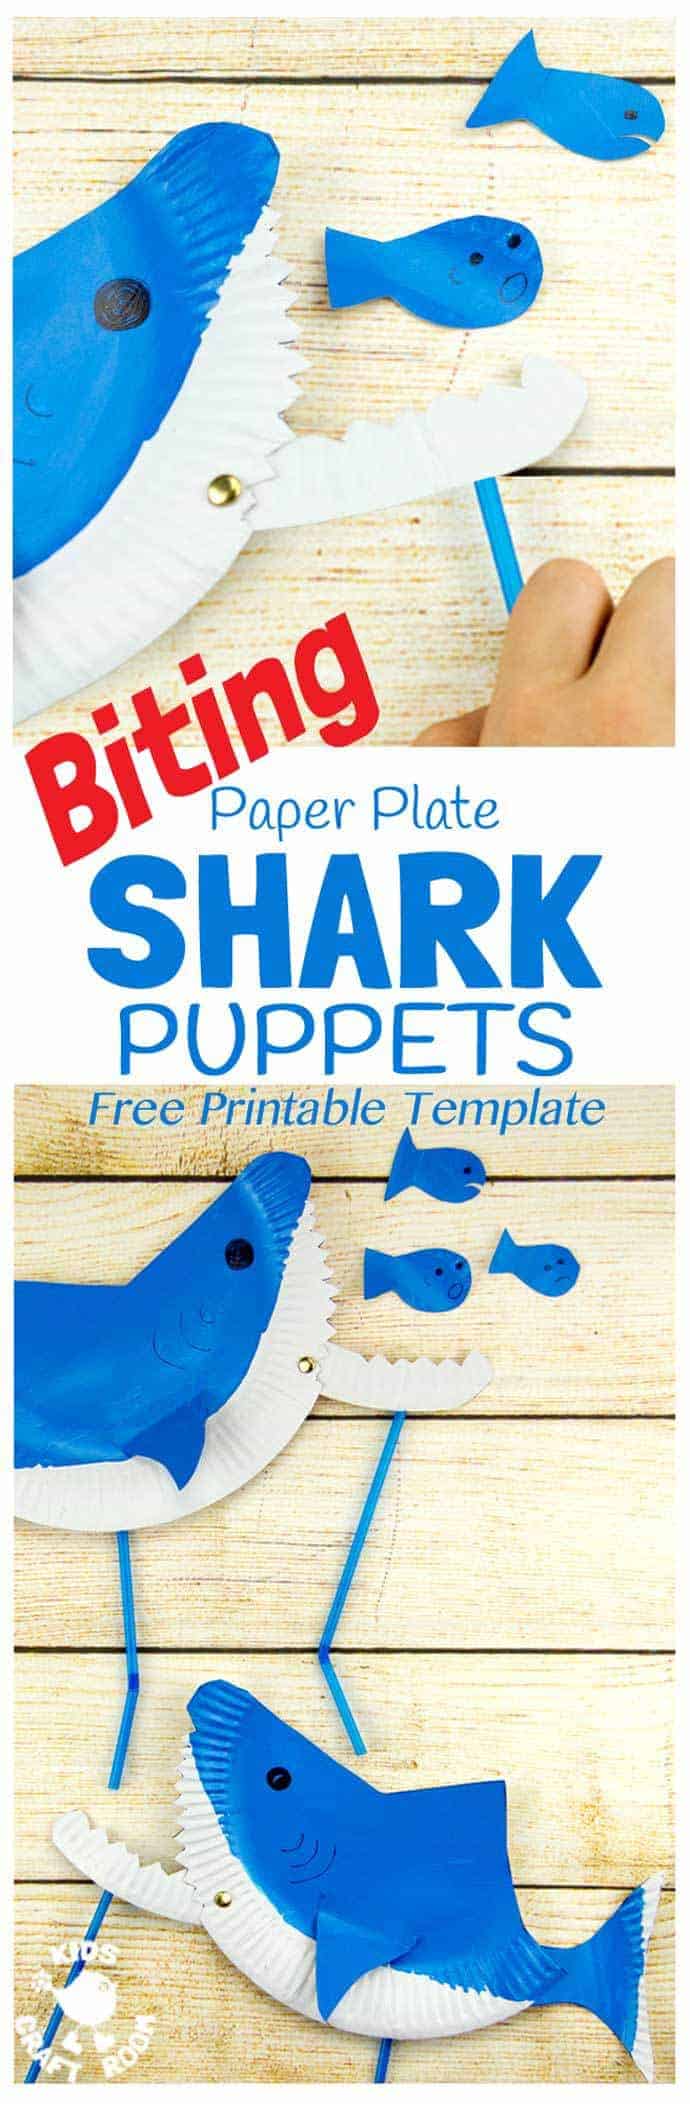 PAPER PLATE SHARK PUPPETS are so fun! CHOMP! This interactive shark craft is easy to make using the free printable template. This paper plate craft will inspire hours of dramatic play and storytelling.